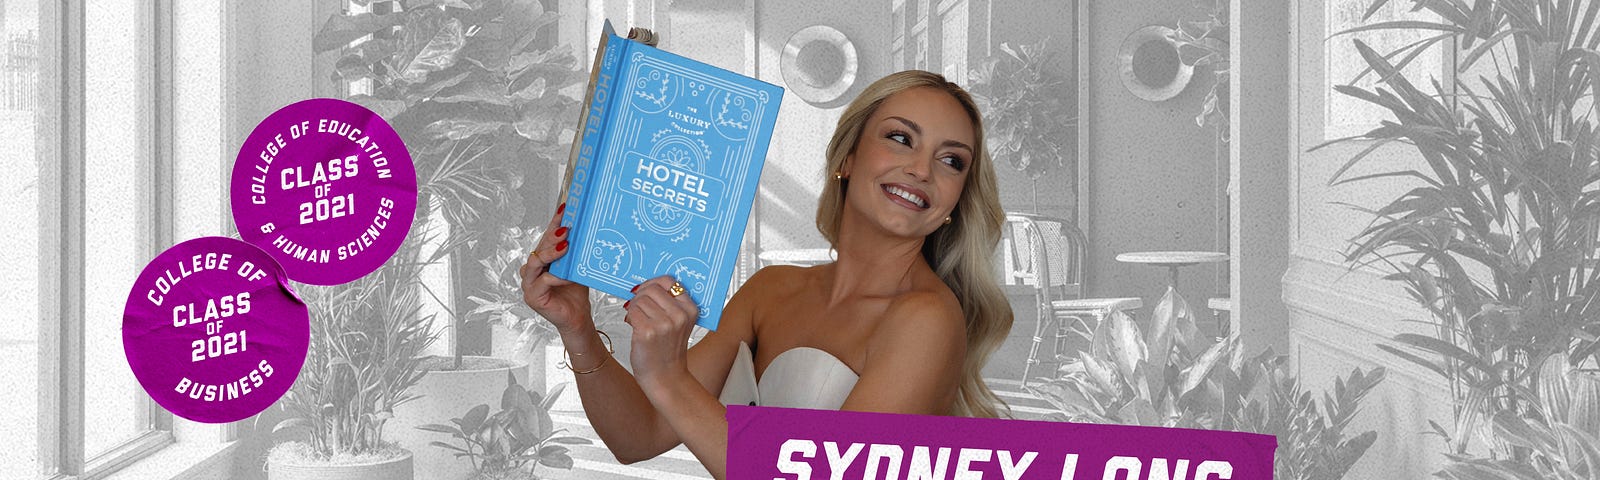 A collage featuring stickers that have Sydney Long’s name and grad year (2021 from the College of Business and the College of Education & Human Sciences). The background is an image of a hotel lobby layered with a photo of Sydney holding up a book that reads “Hotel Secrets.”